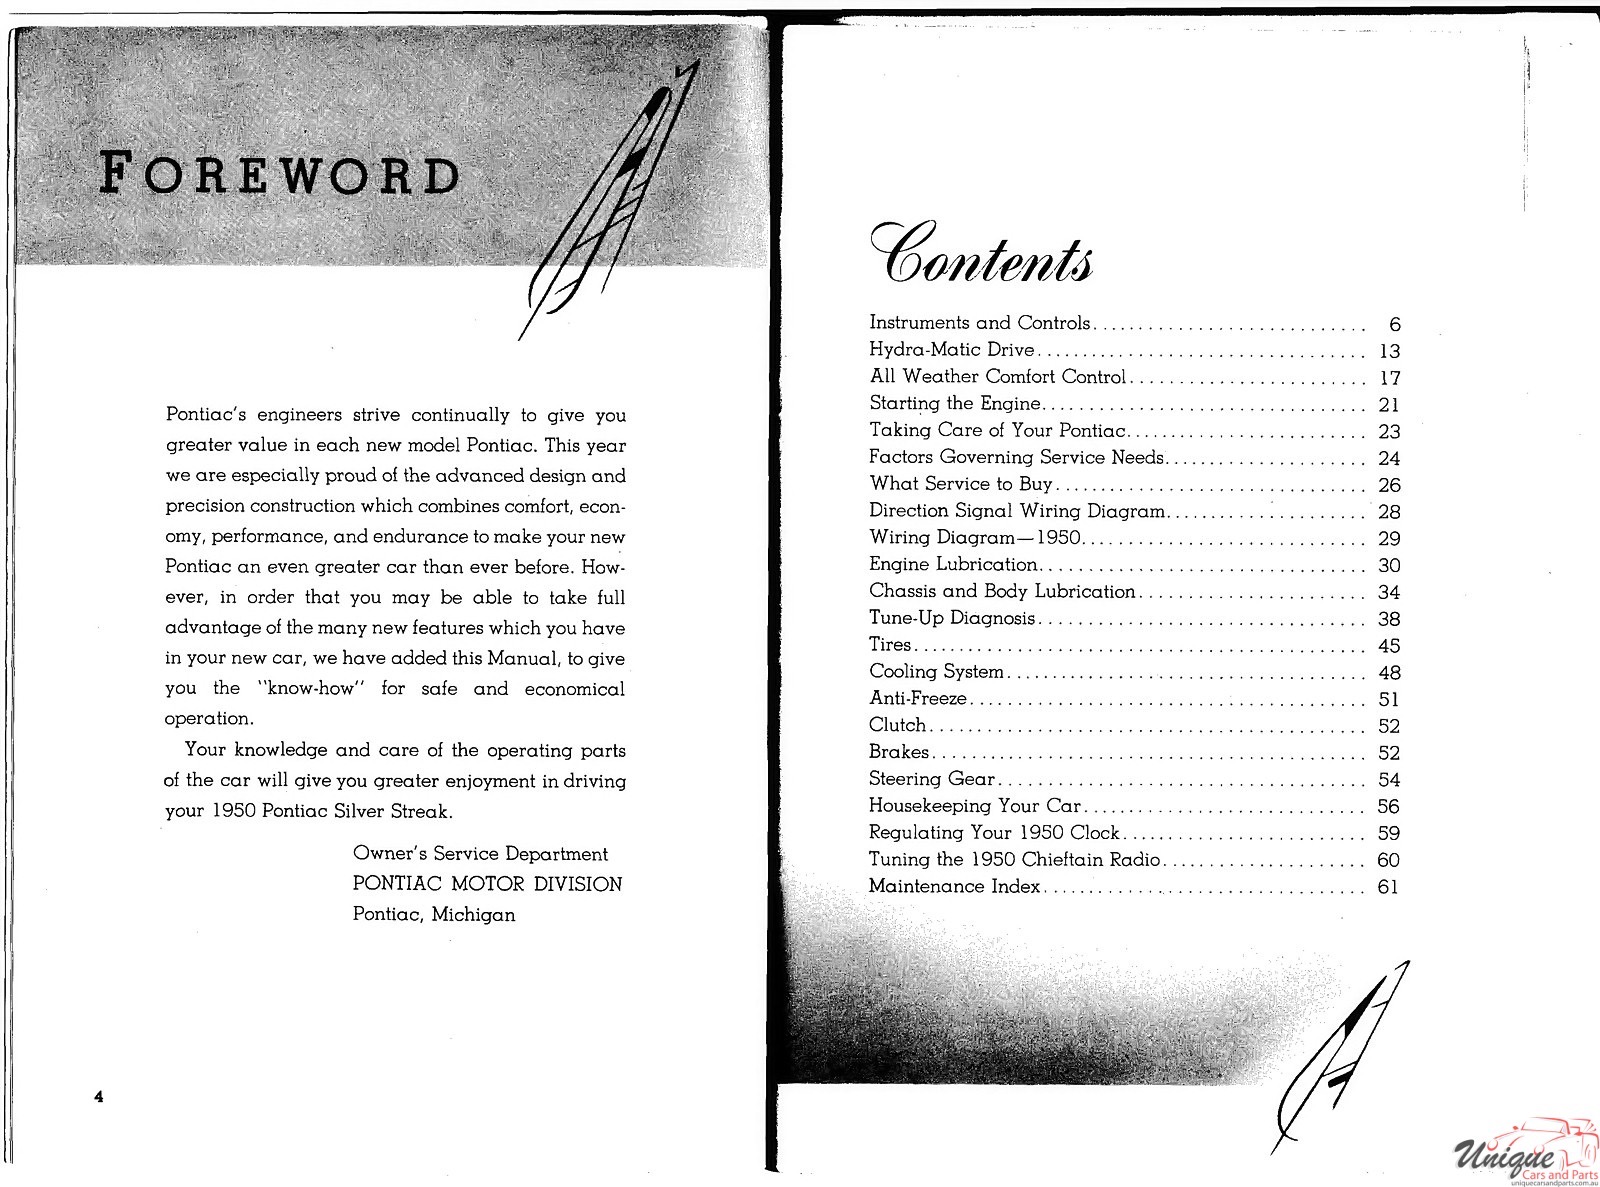 1950 Pontiac Owners Manual Page 19